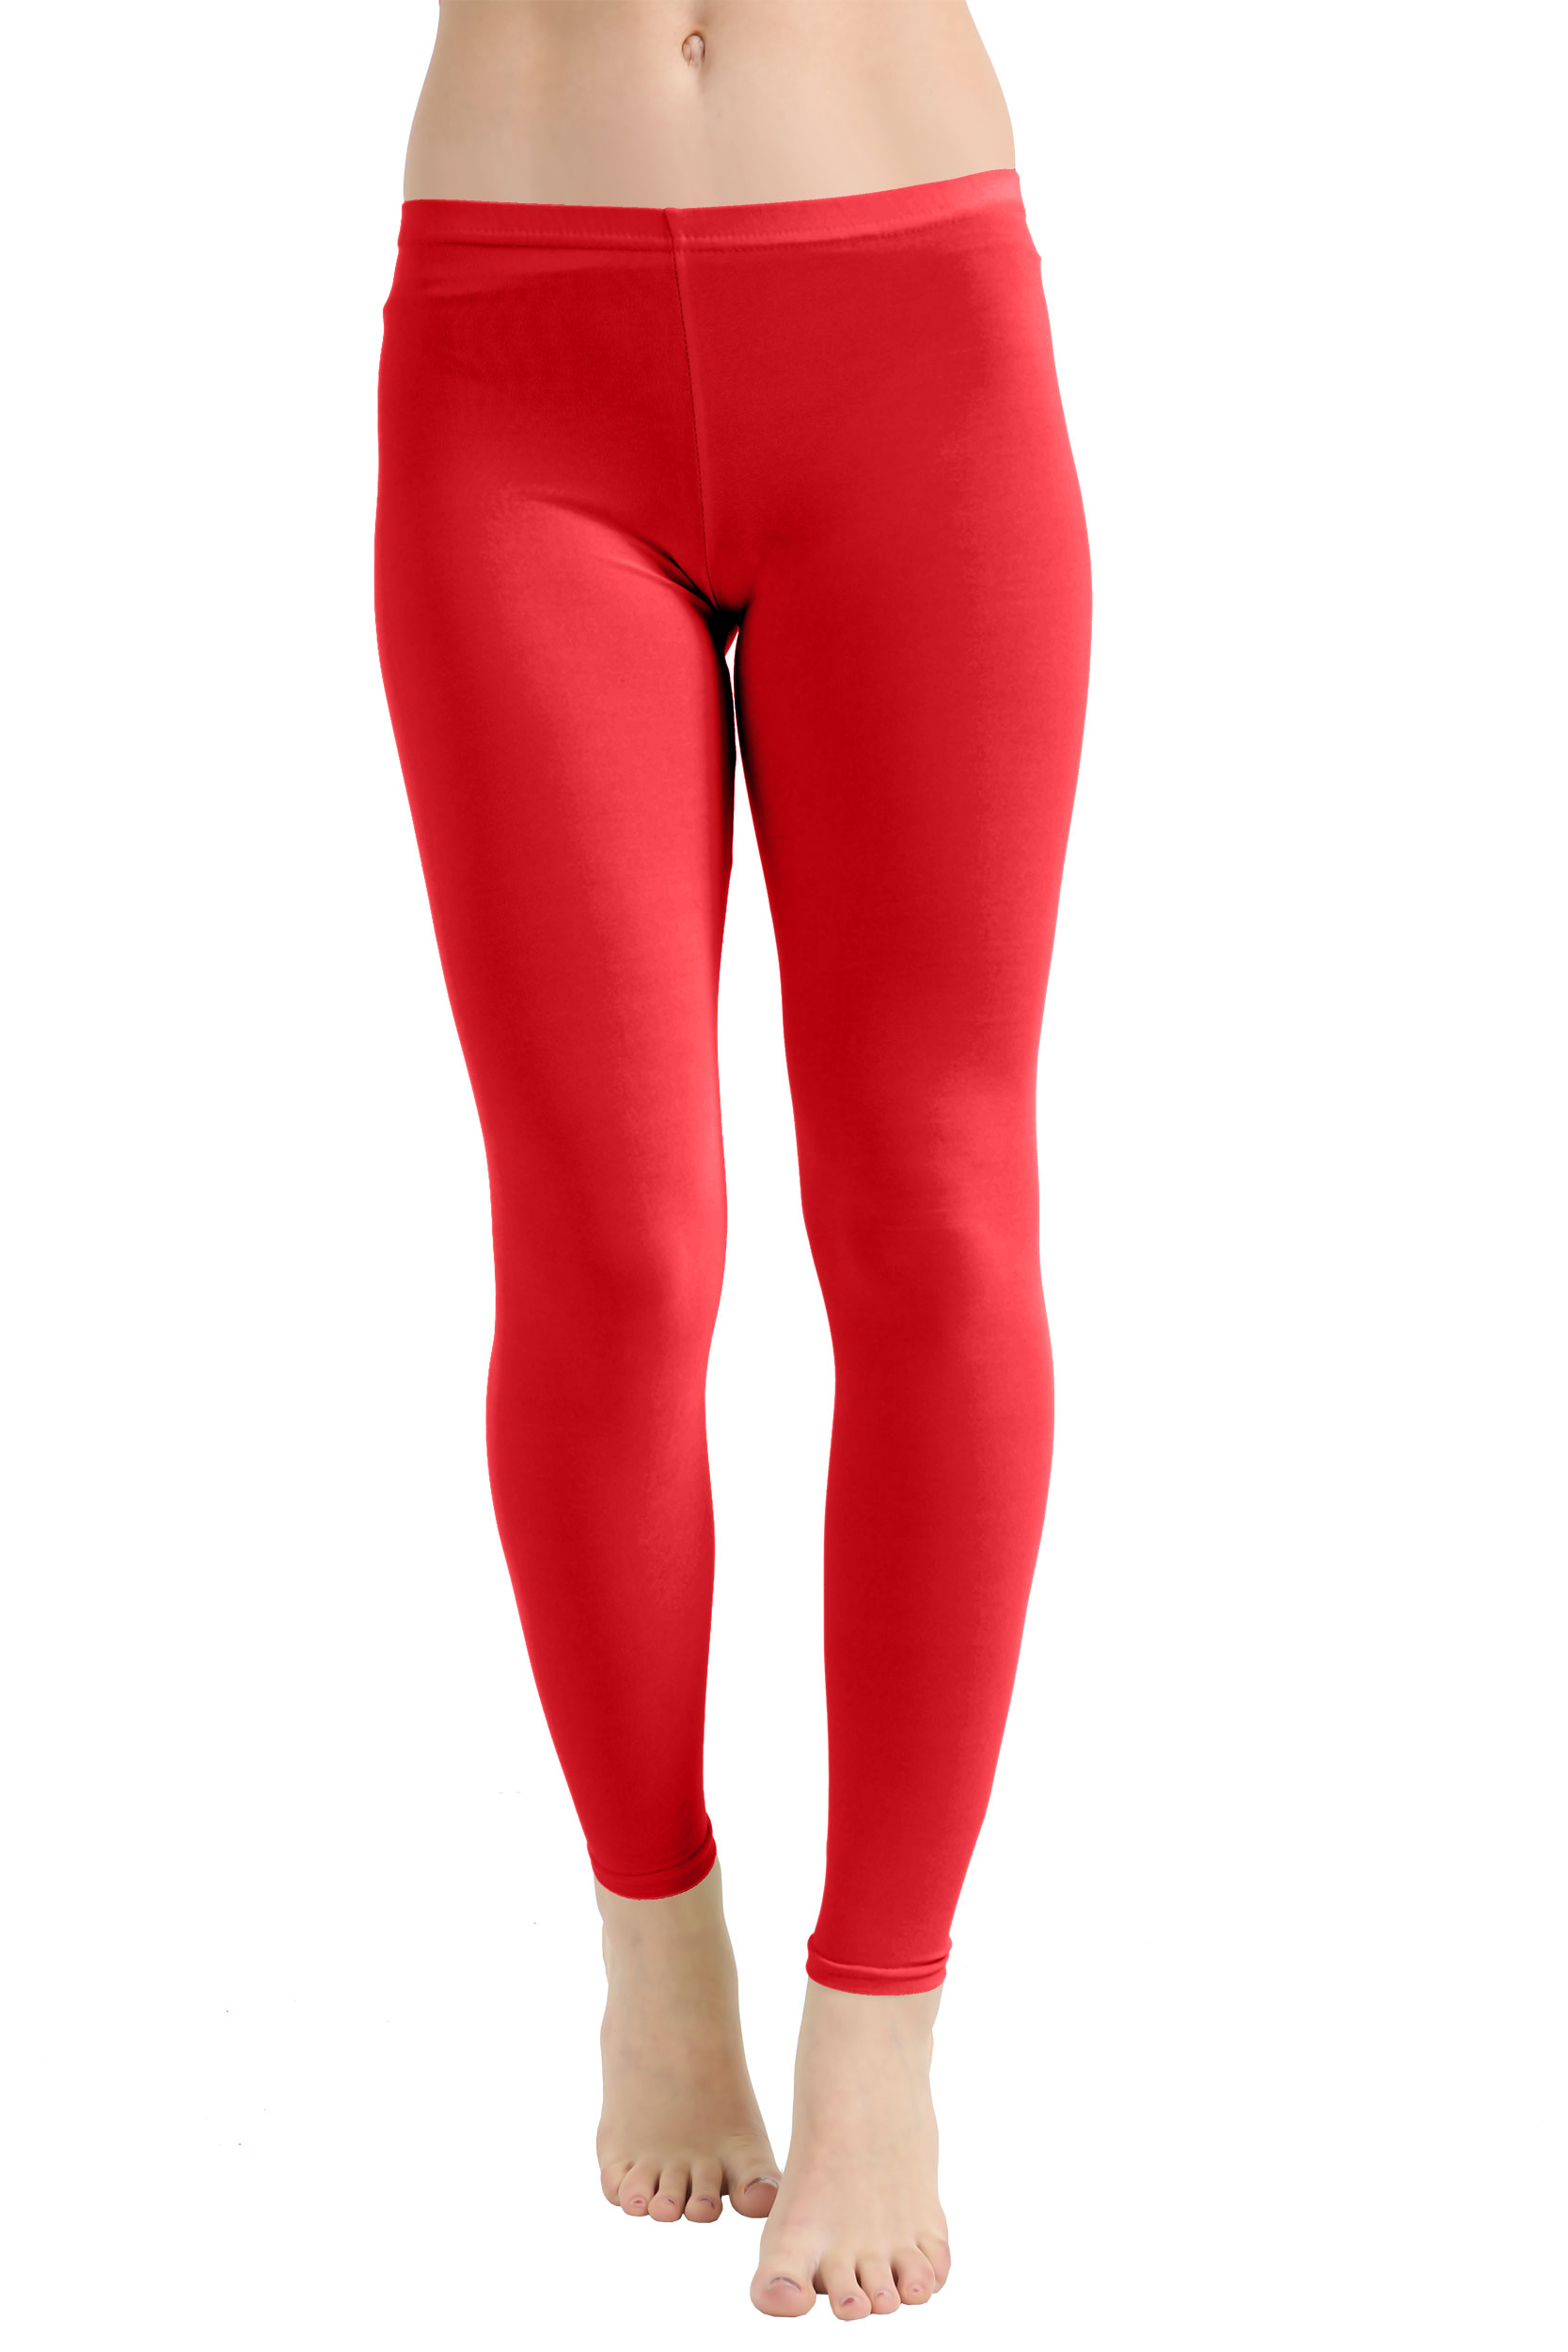 Crazy Chick Adult Microfibre Red Leggings